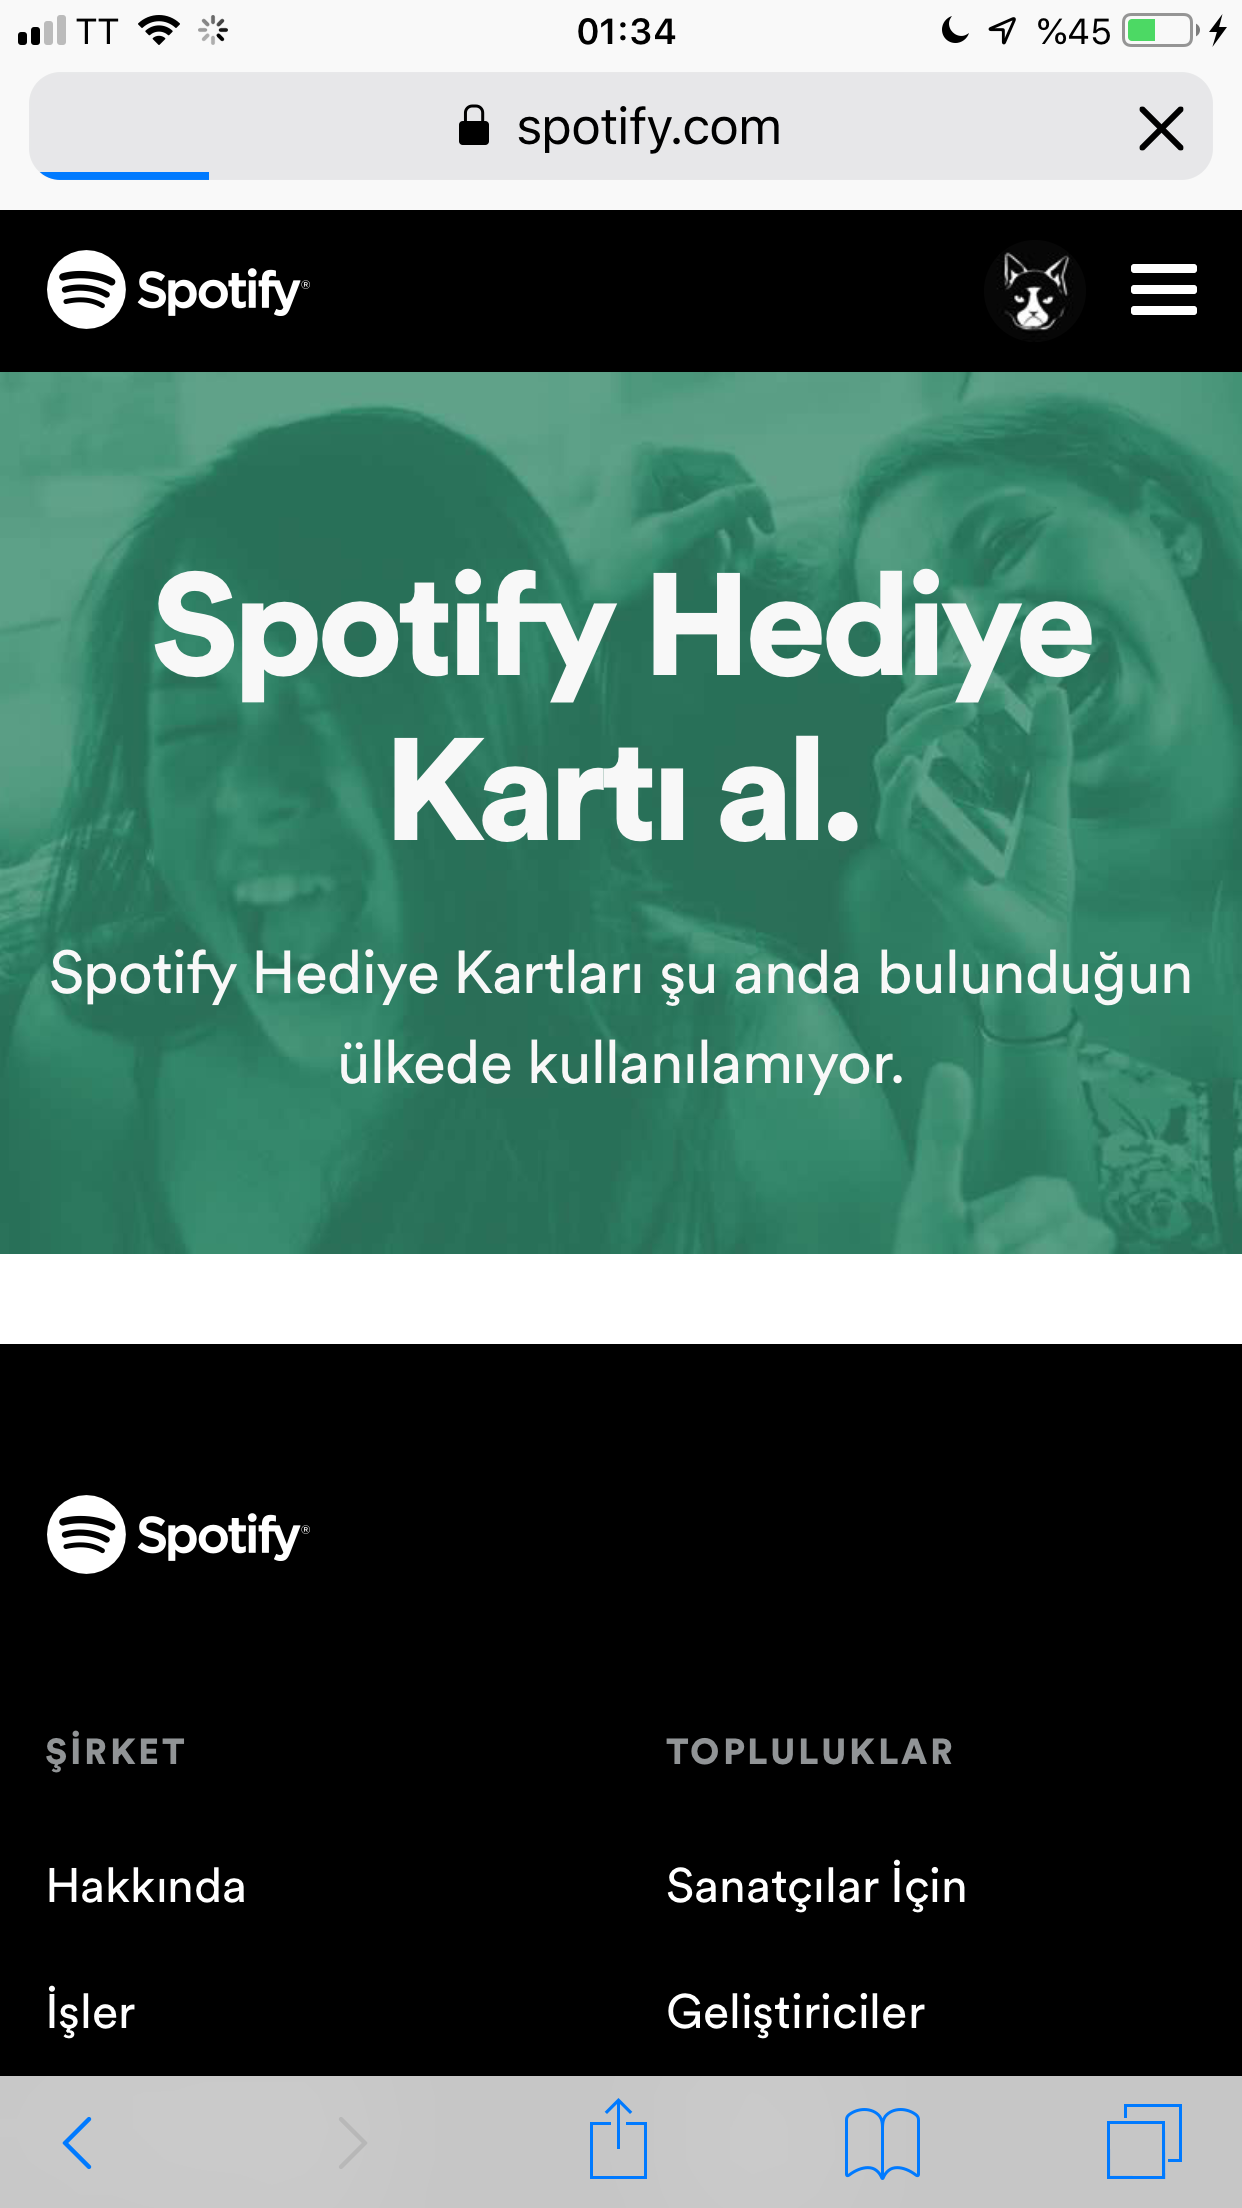 Gift cars issue (in Turkey) - The Spotify Community